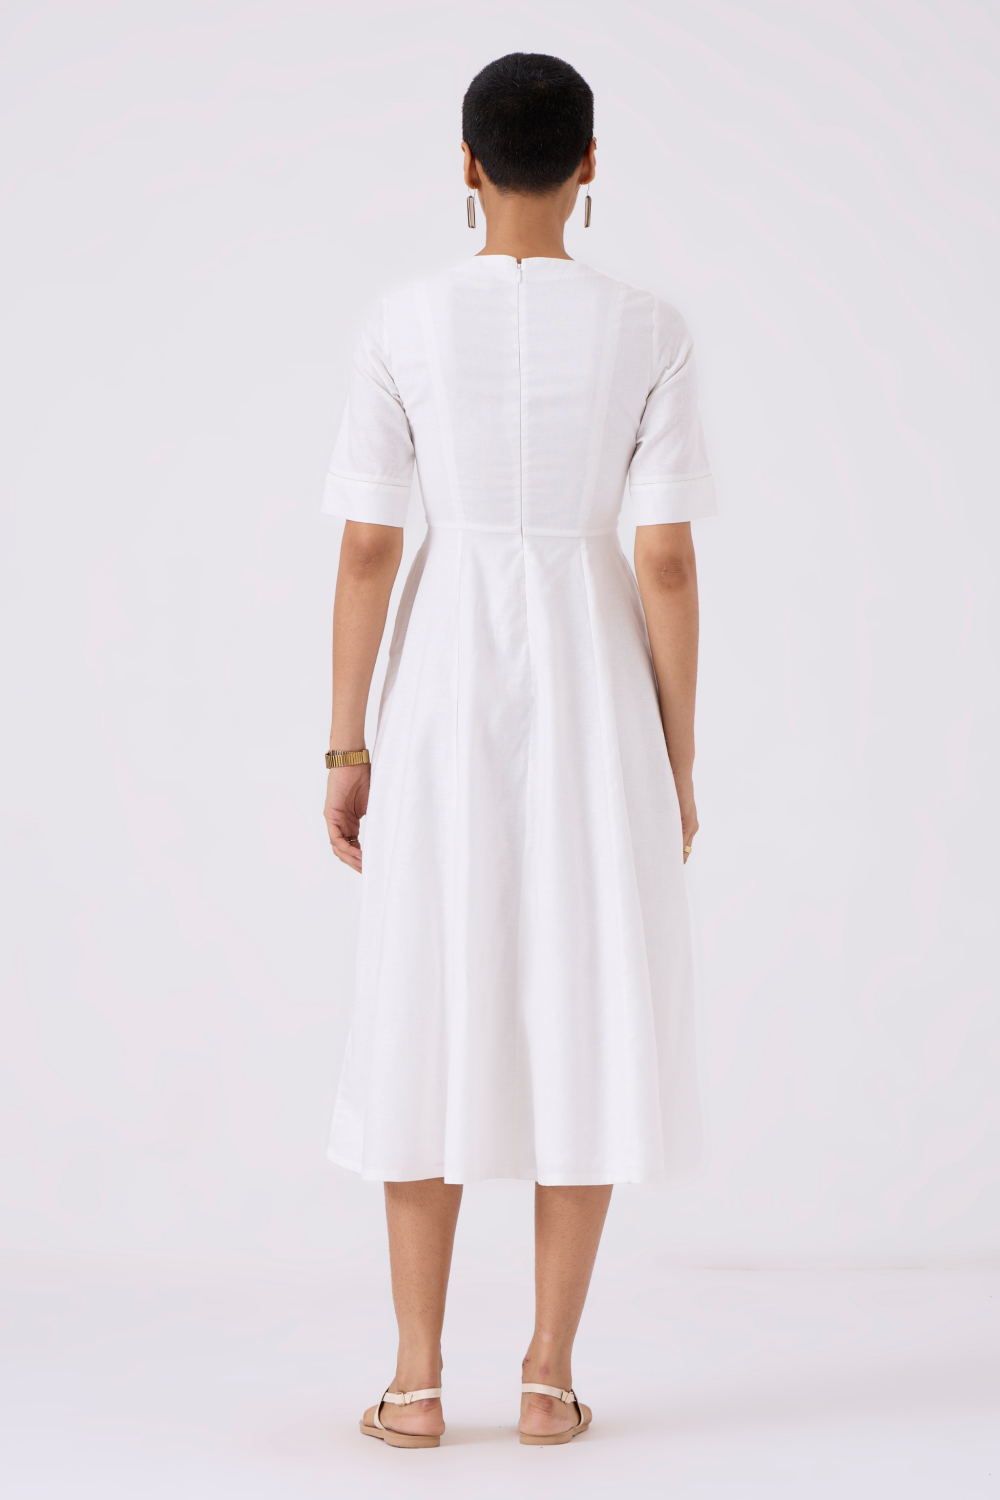 Flo White Fit & Flare Dress